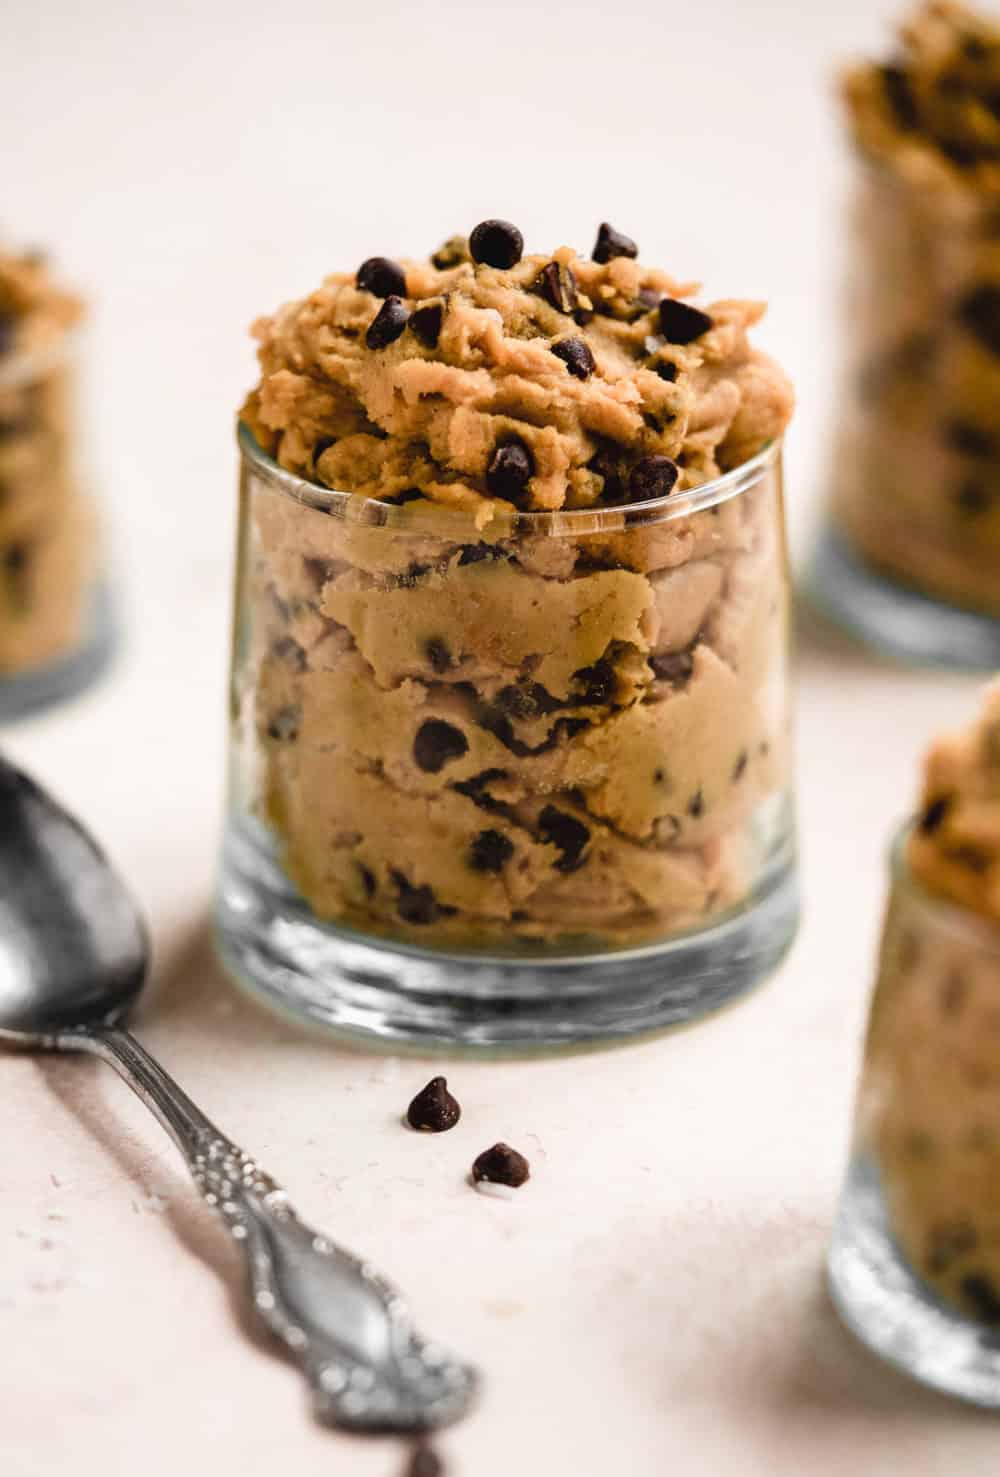 Small glass filled with edible cookie dough.